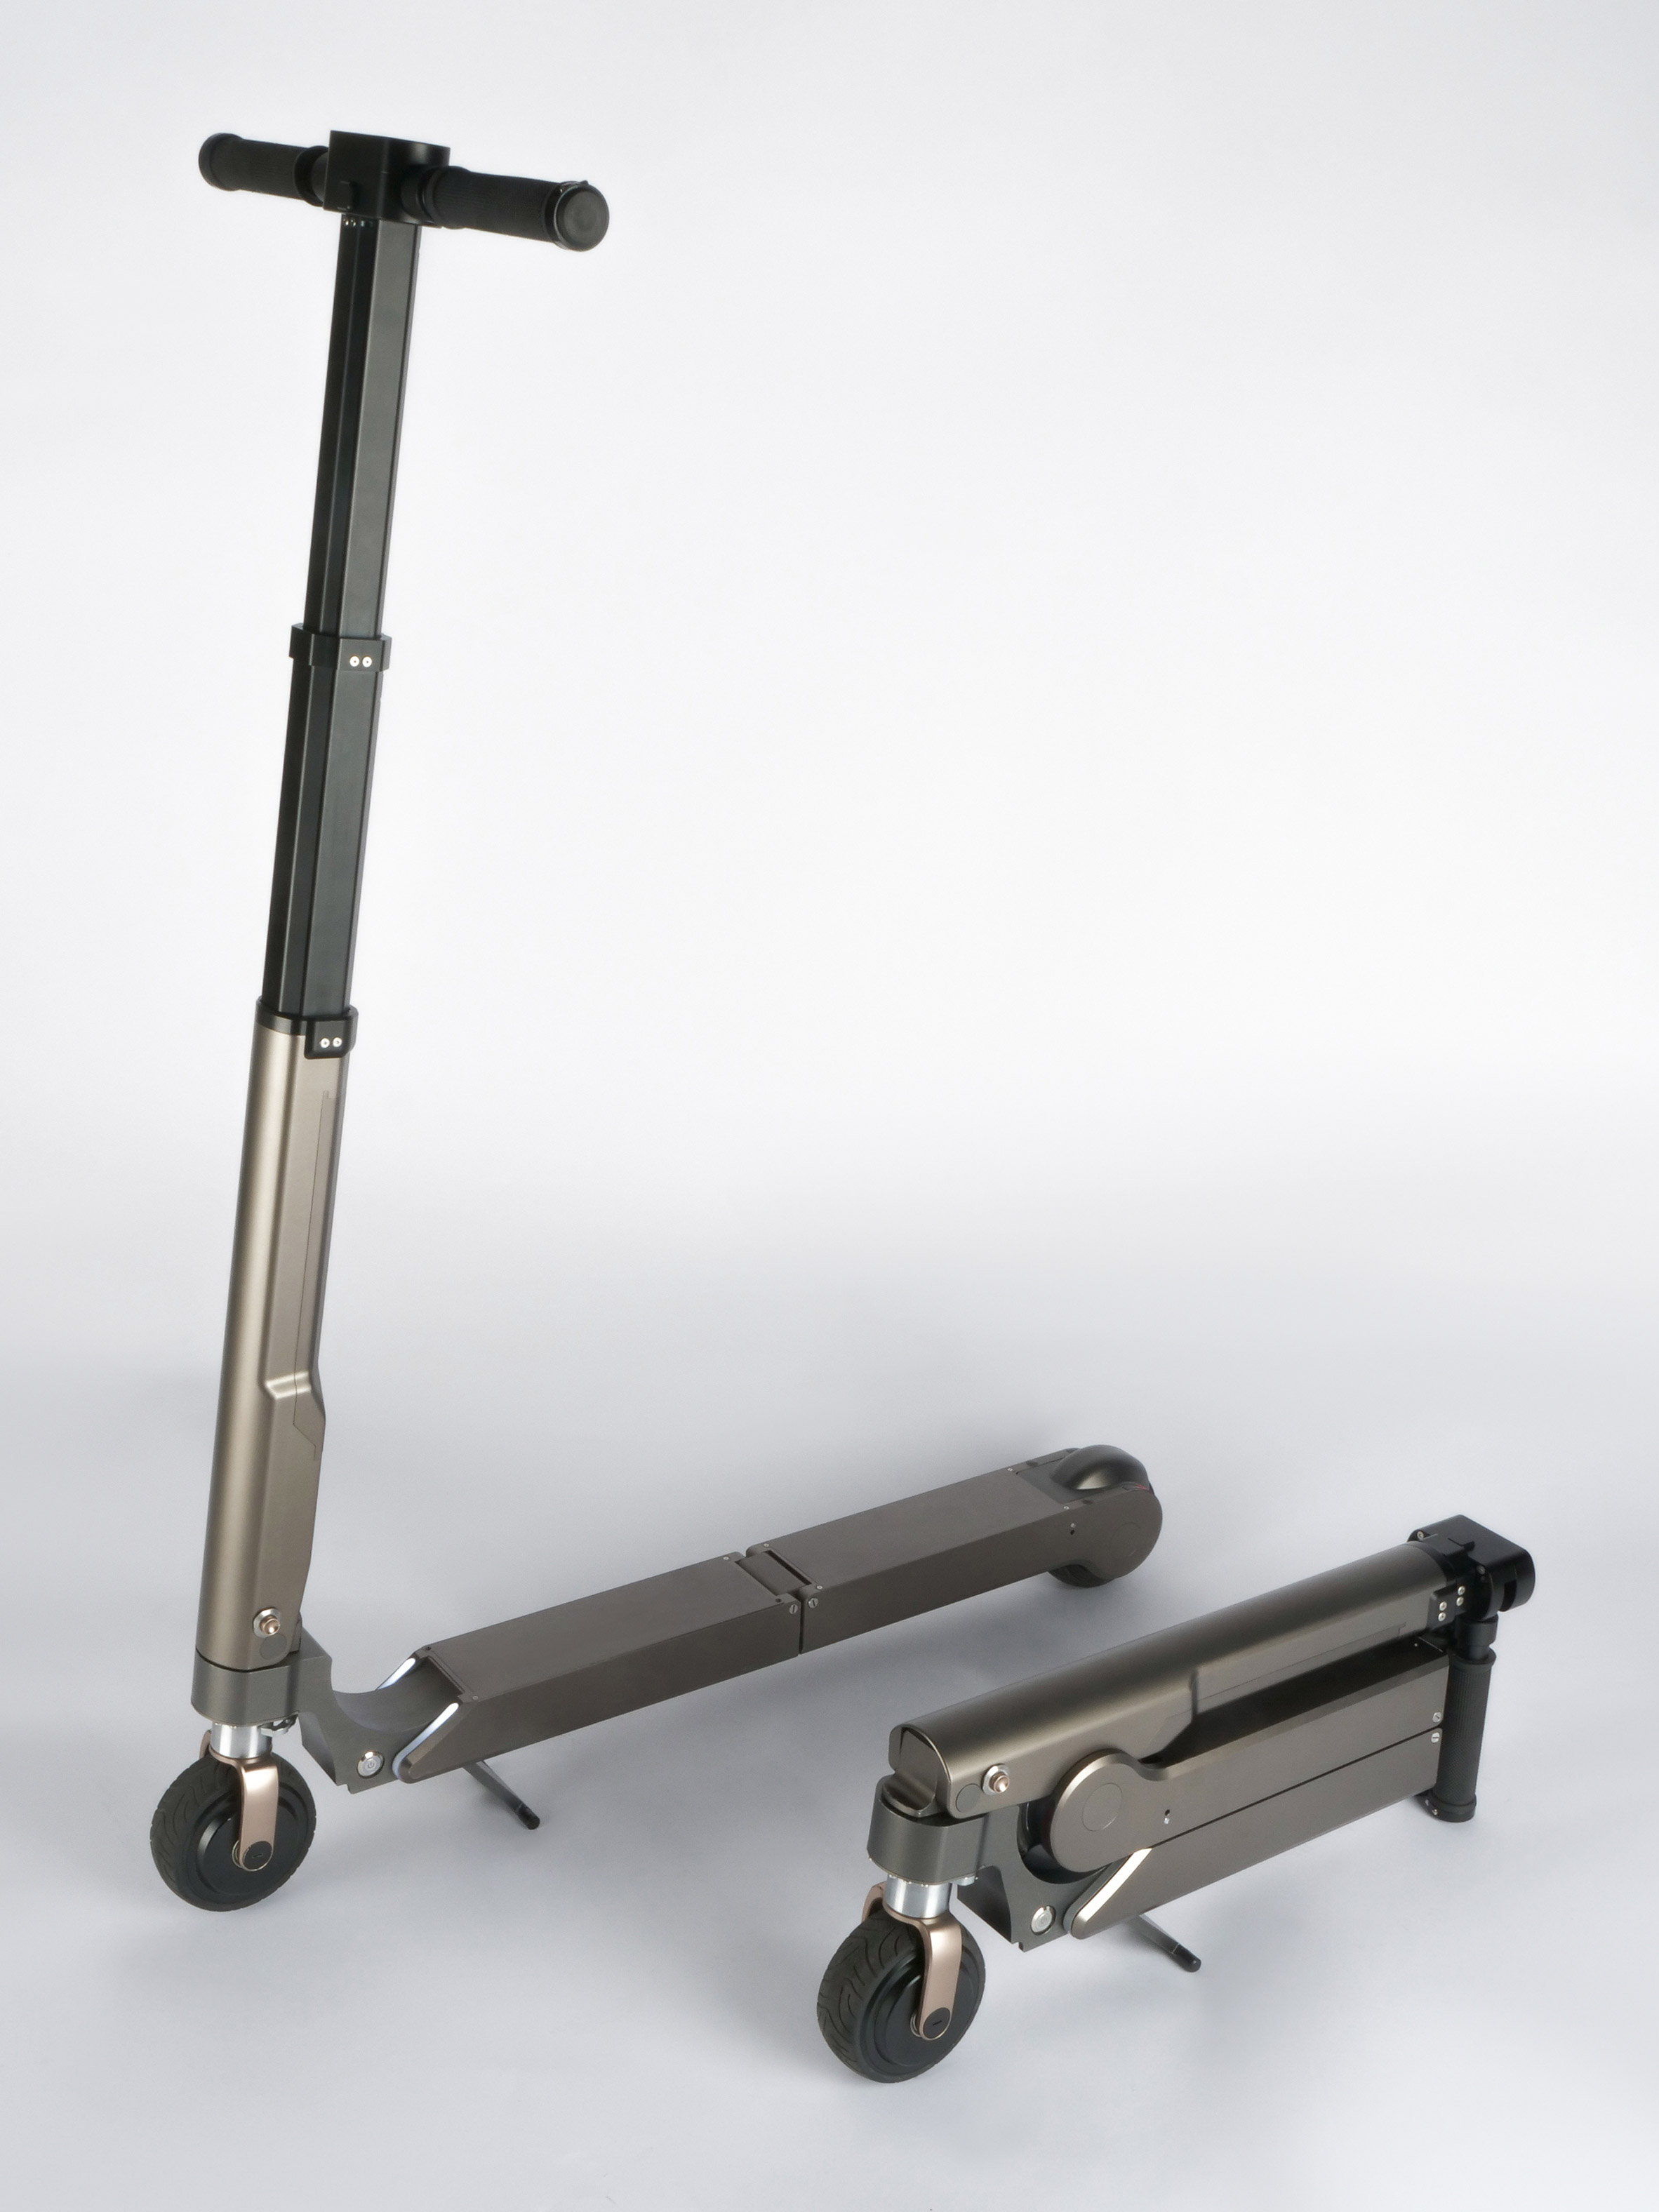 A size comparison of the Hyundai scooter folded and unfolded